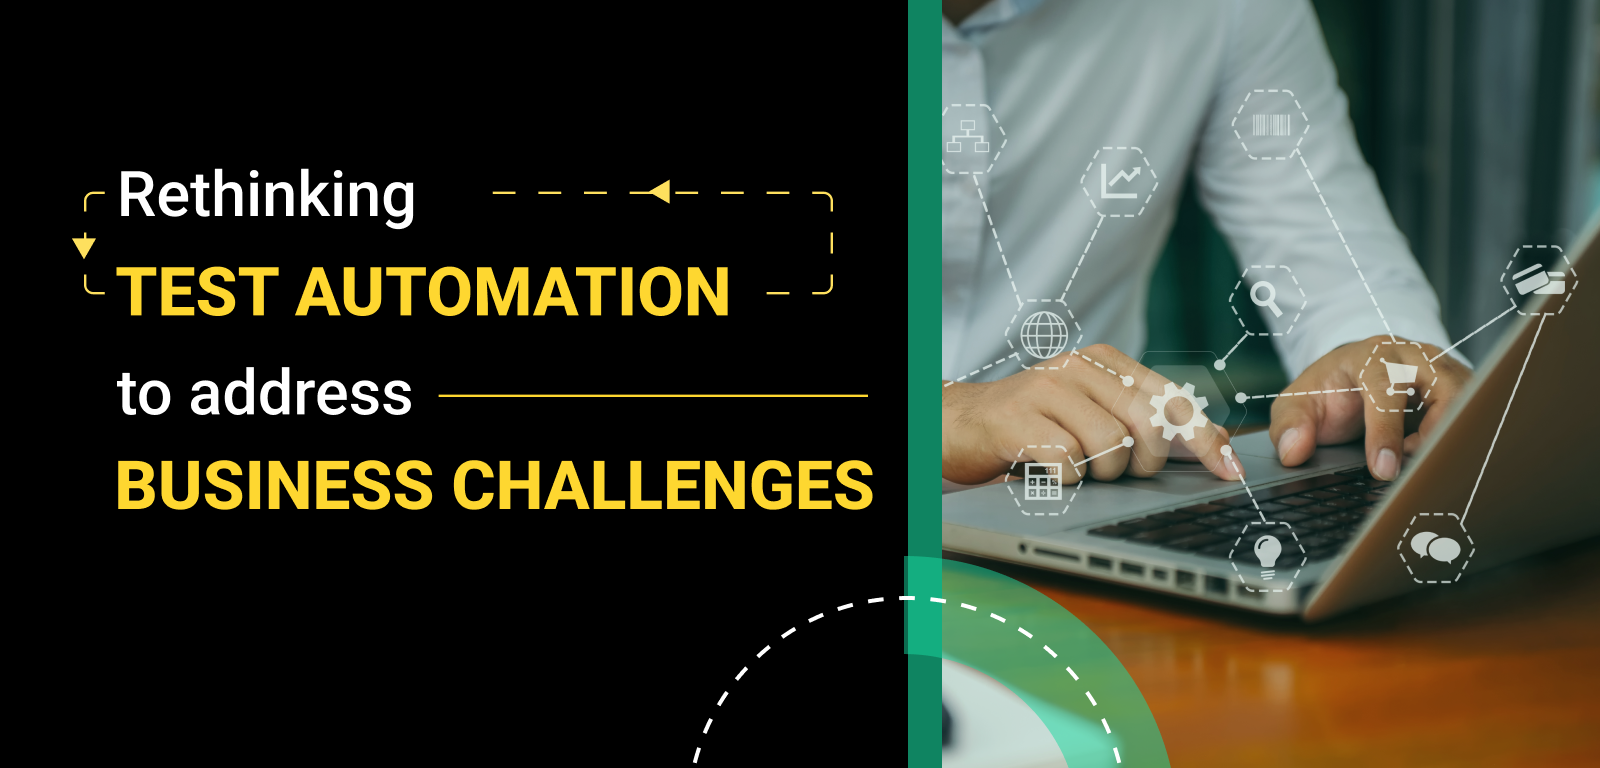 Rethinking test automation to address business challenges